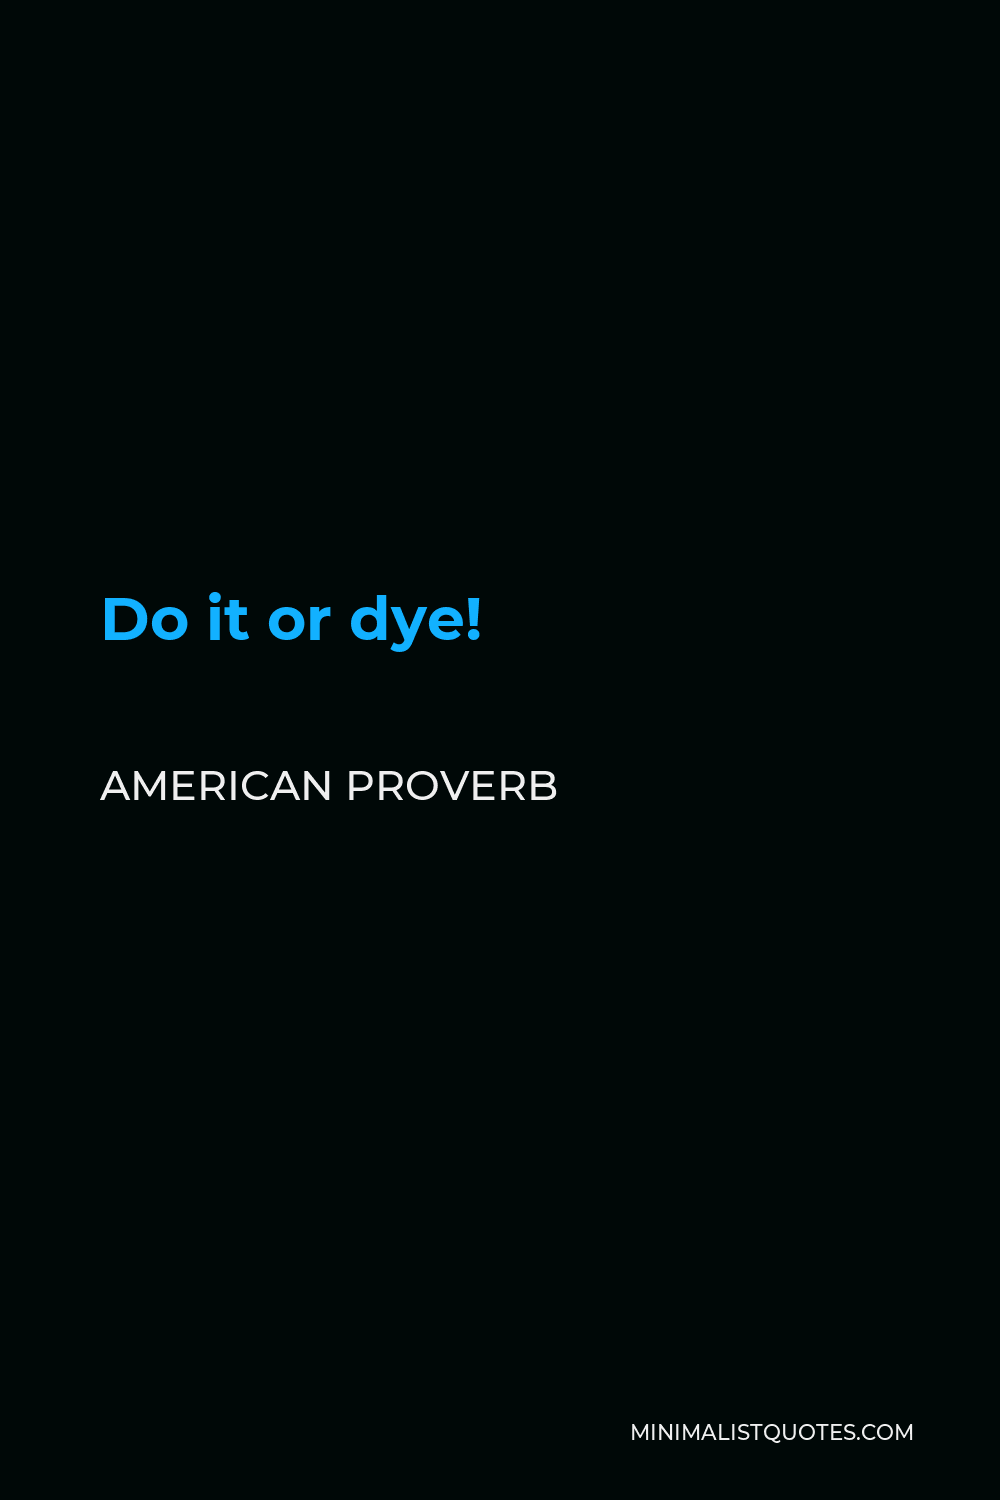 American Proverb Quote - Do it or dye!